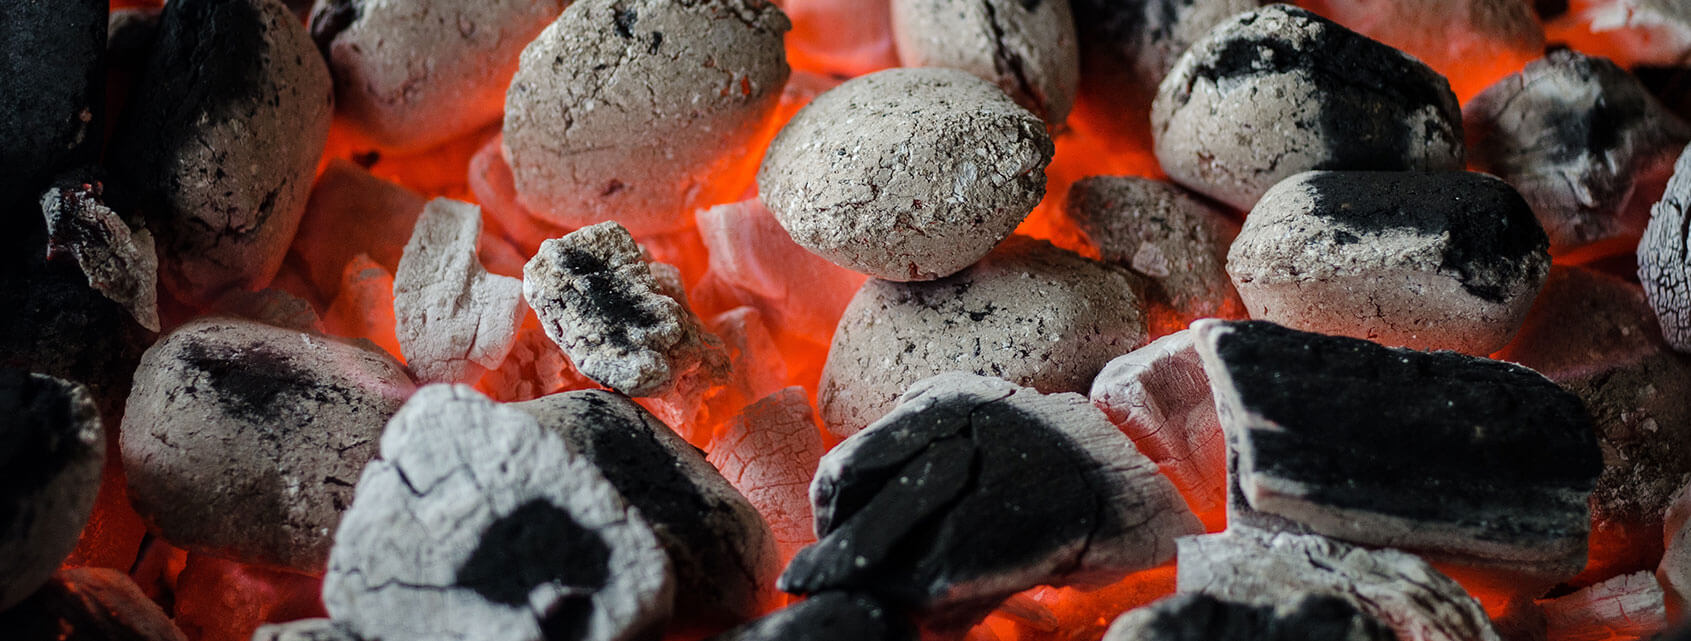 Bird’s-eye view of hot, ashy charcoal briquets with orange flames poking through.